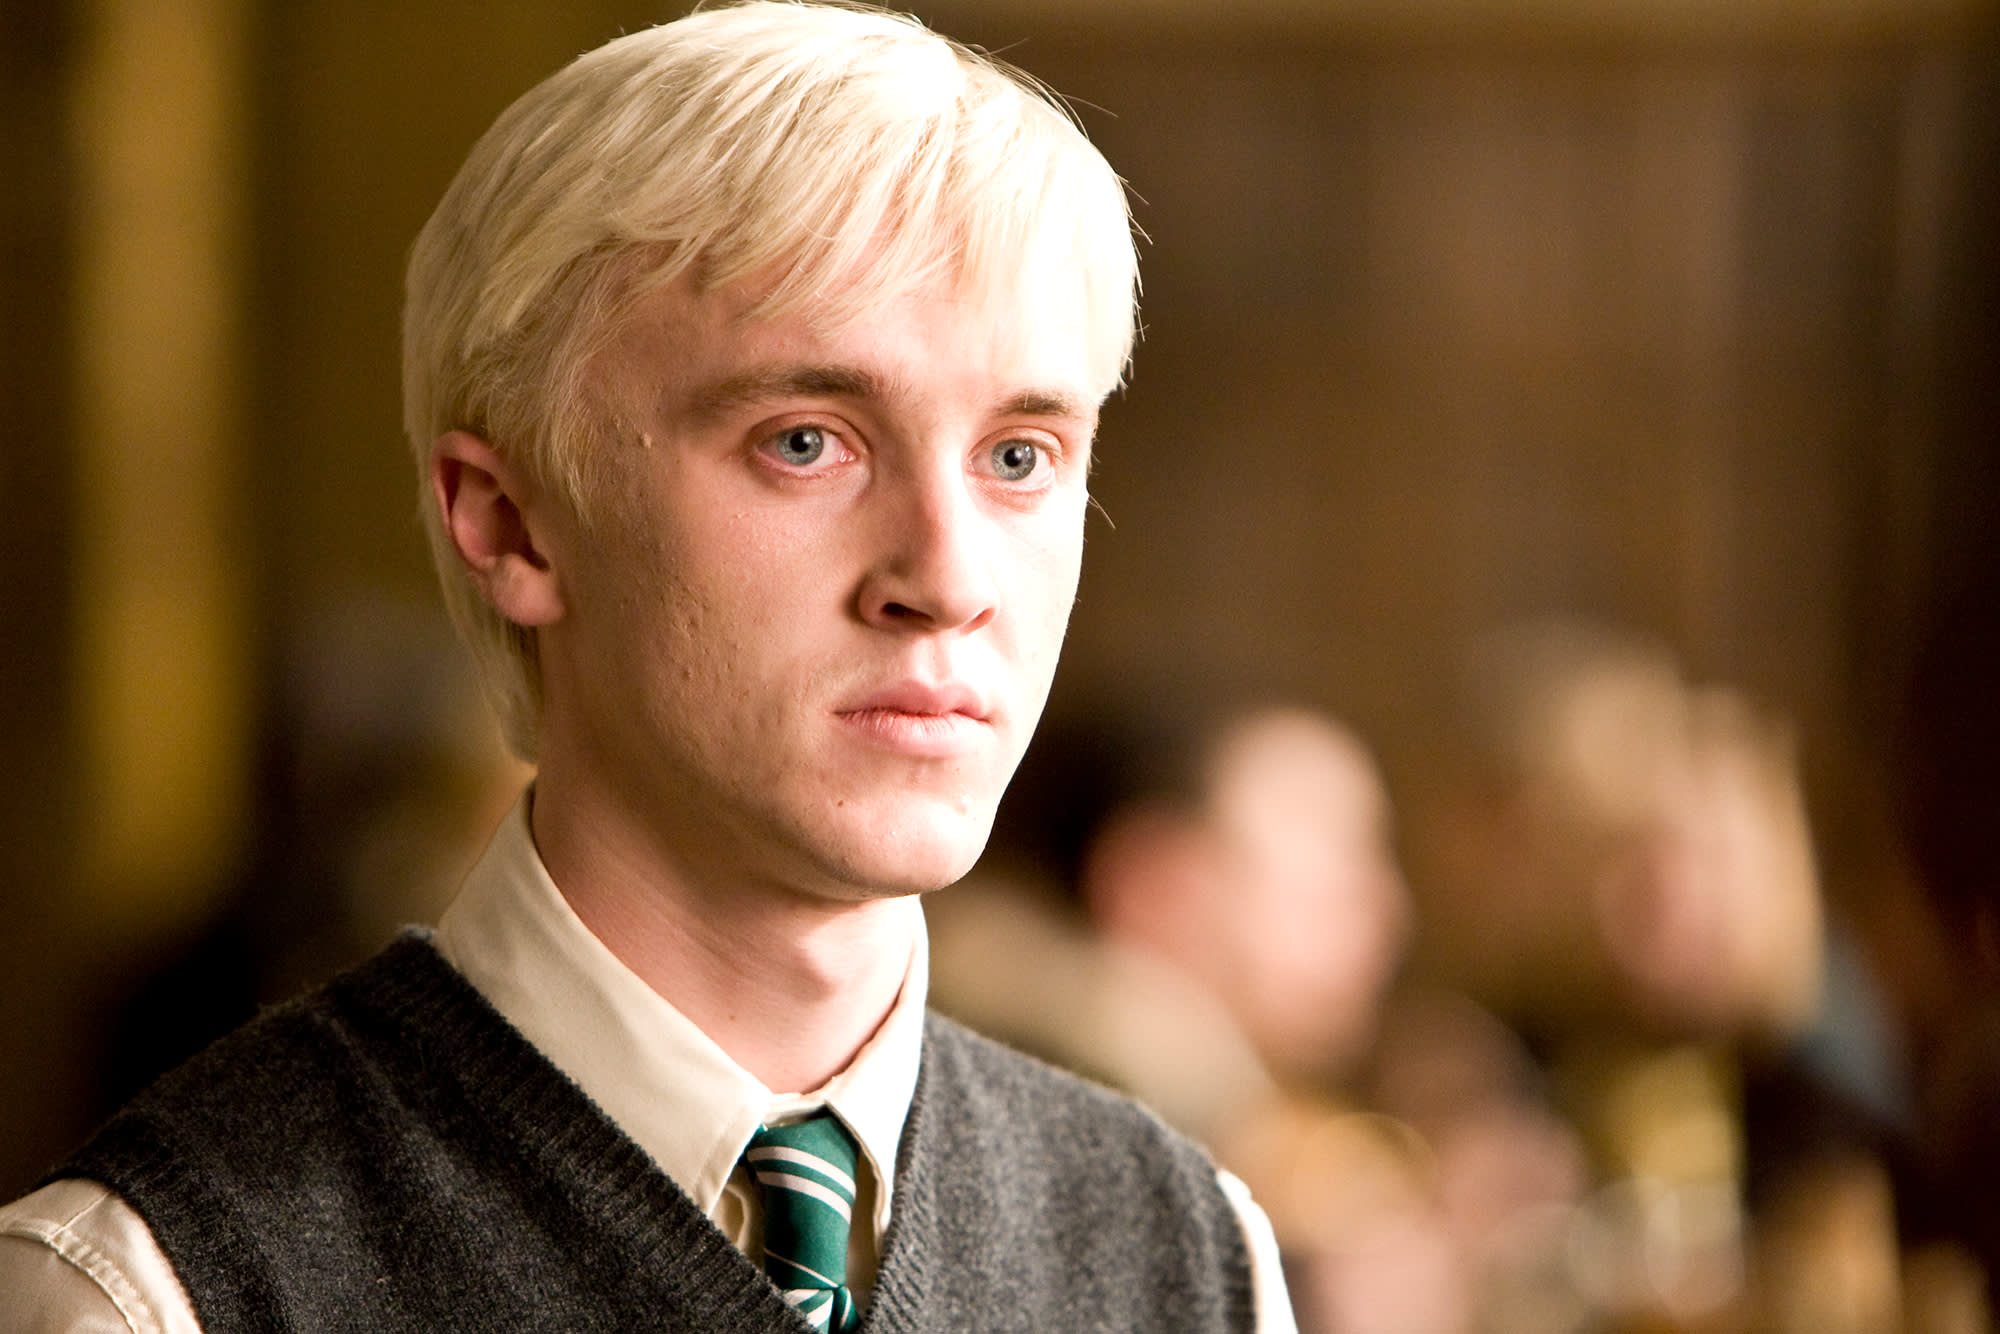 A close up image of Draco Malfoy looking concerned.